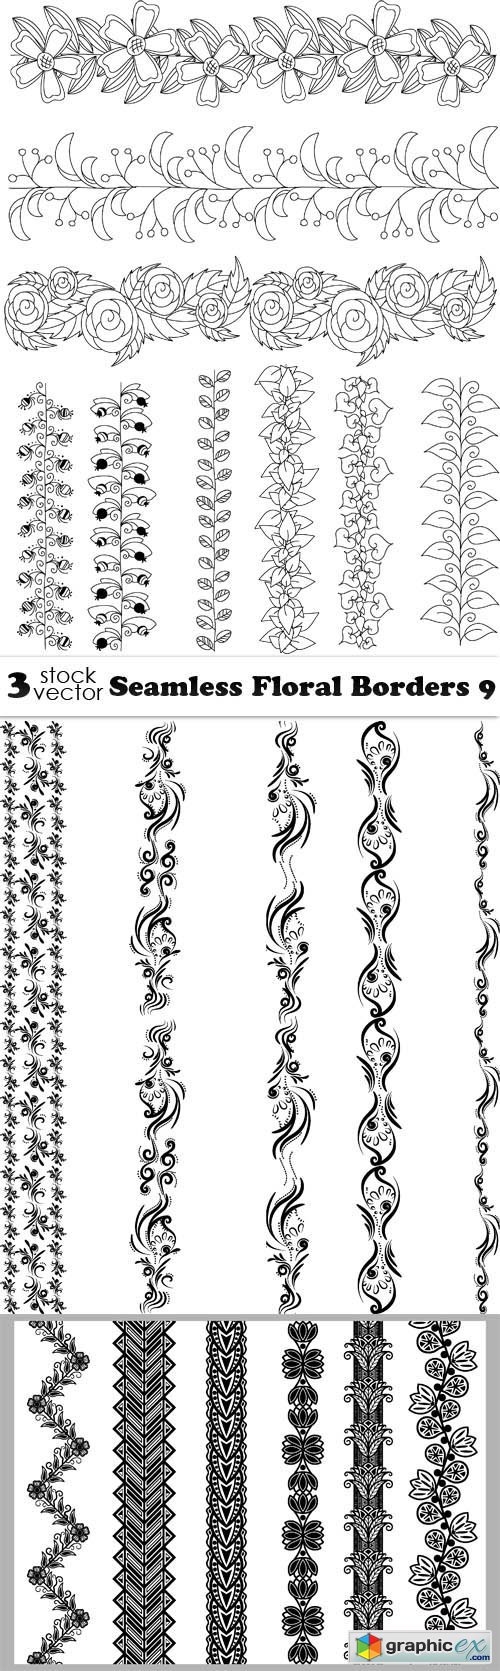 Seamless Floral Borders 9